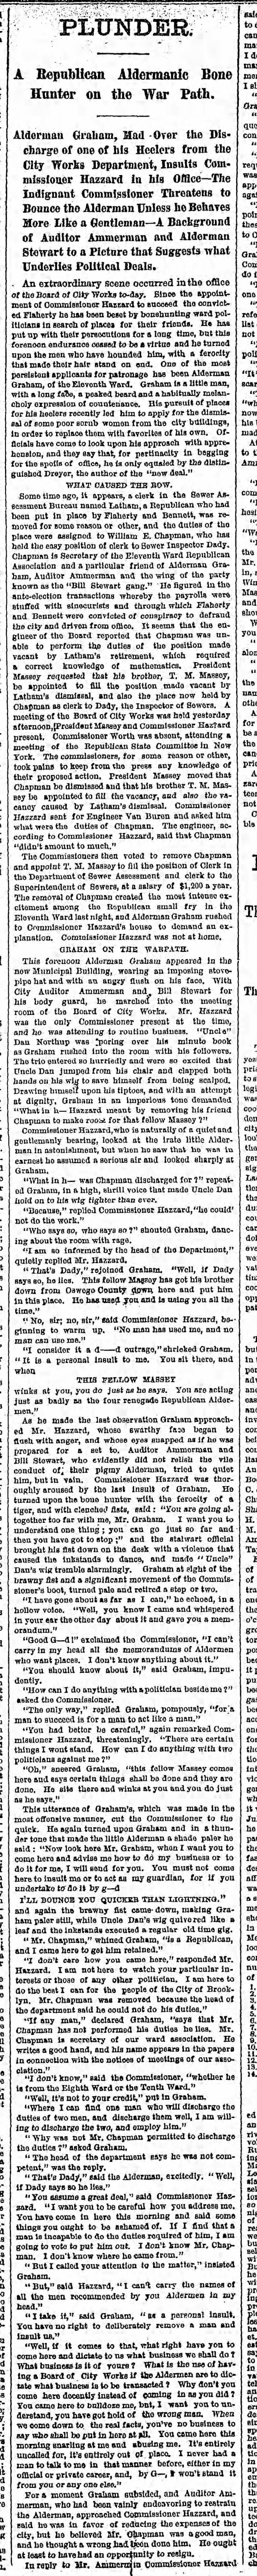 Friday, September 12, 1879 - Page 4 - 1 of 2